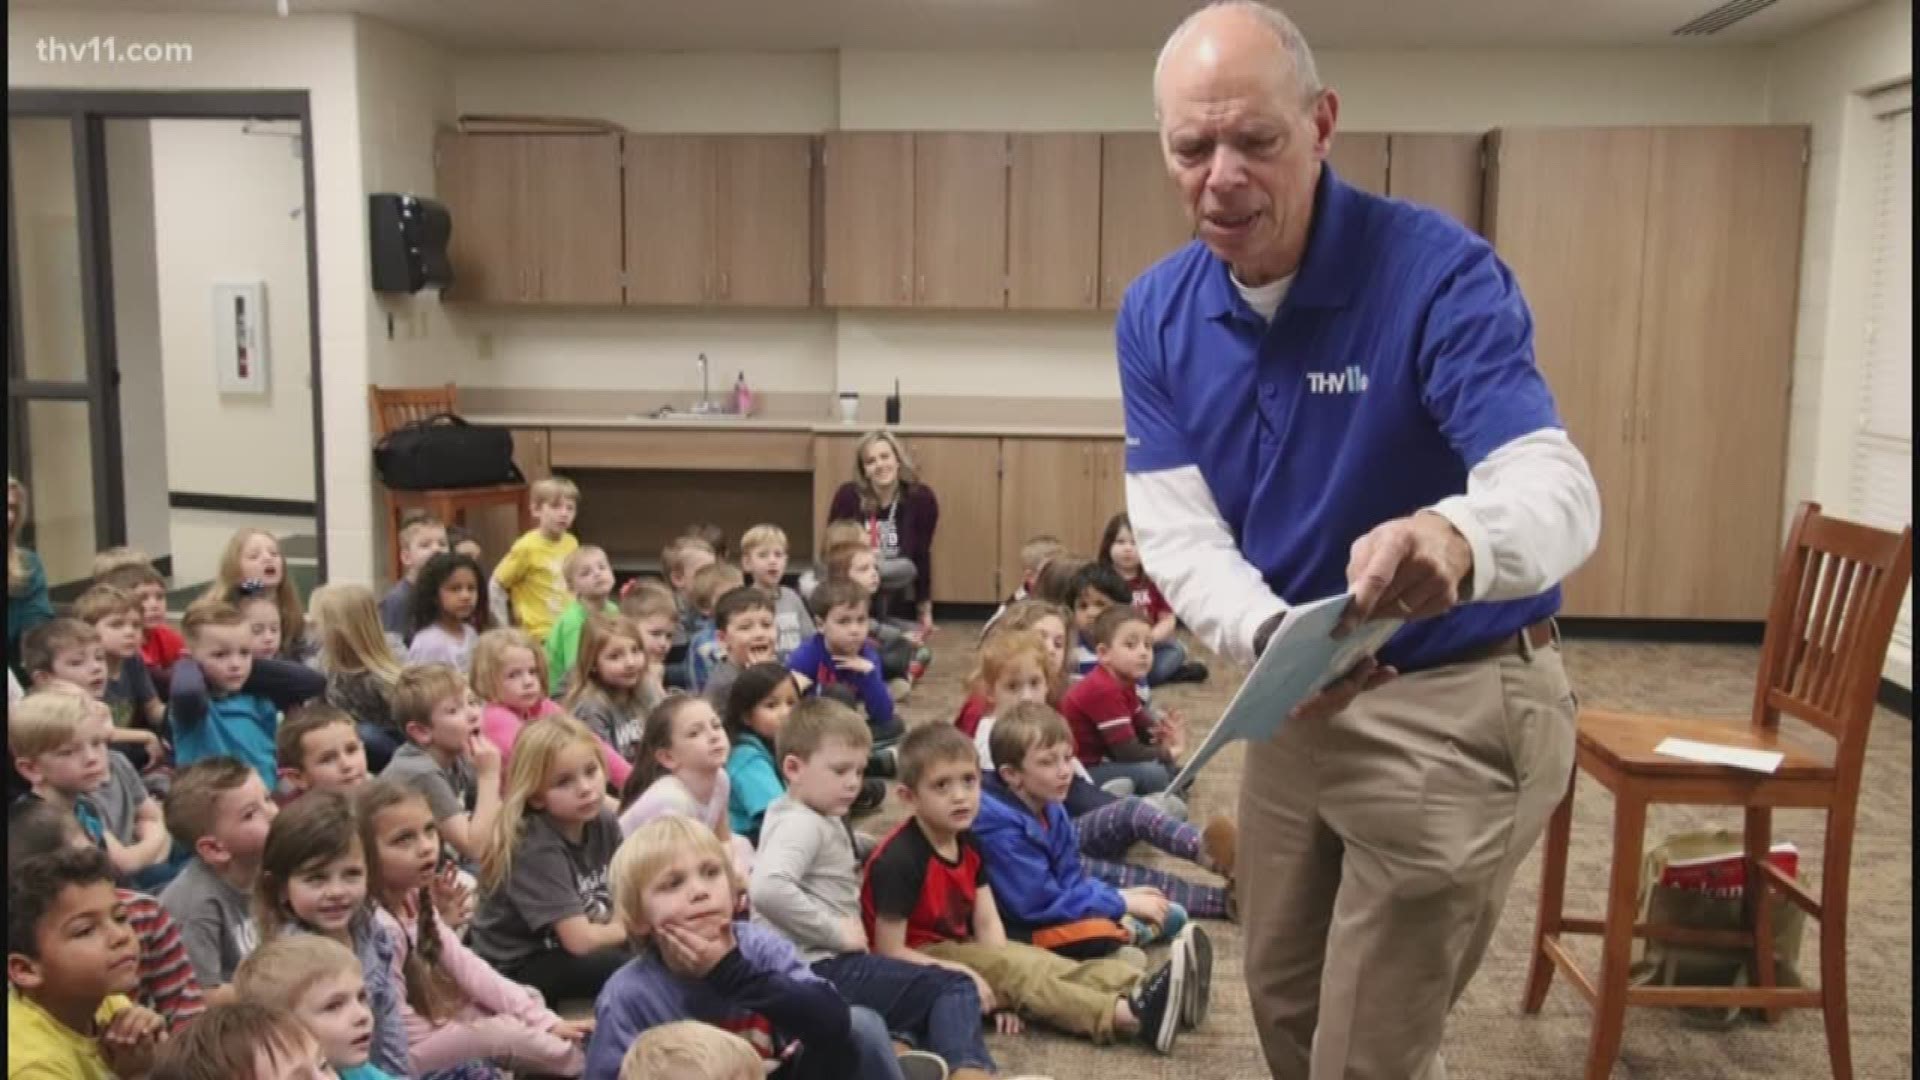 The new book "Bernie the One Eyed Dog" was perfect for the Reading Road Trip at Southside Elementary in Cabot.